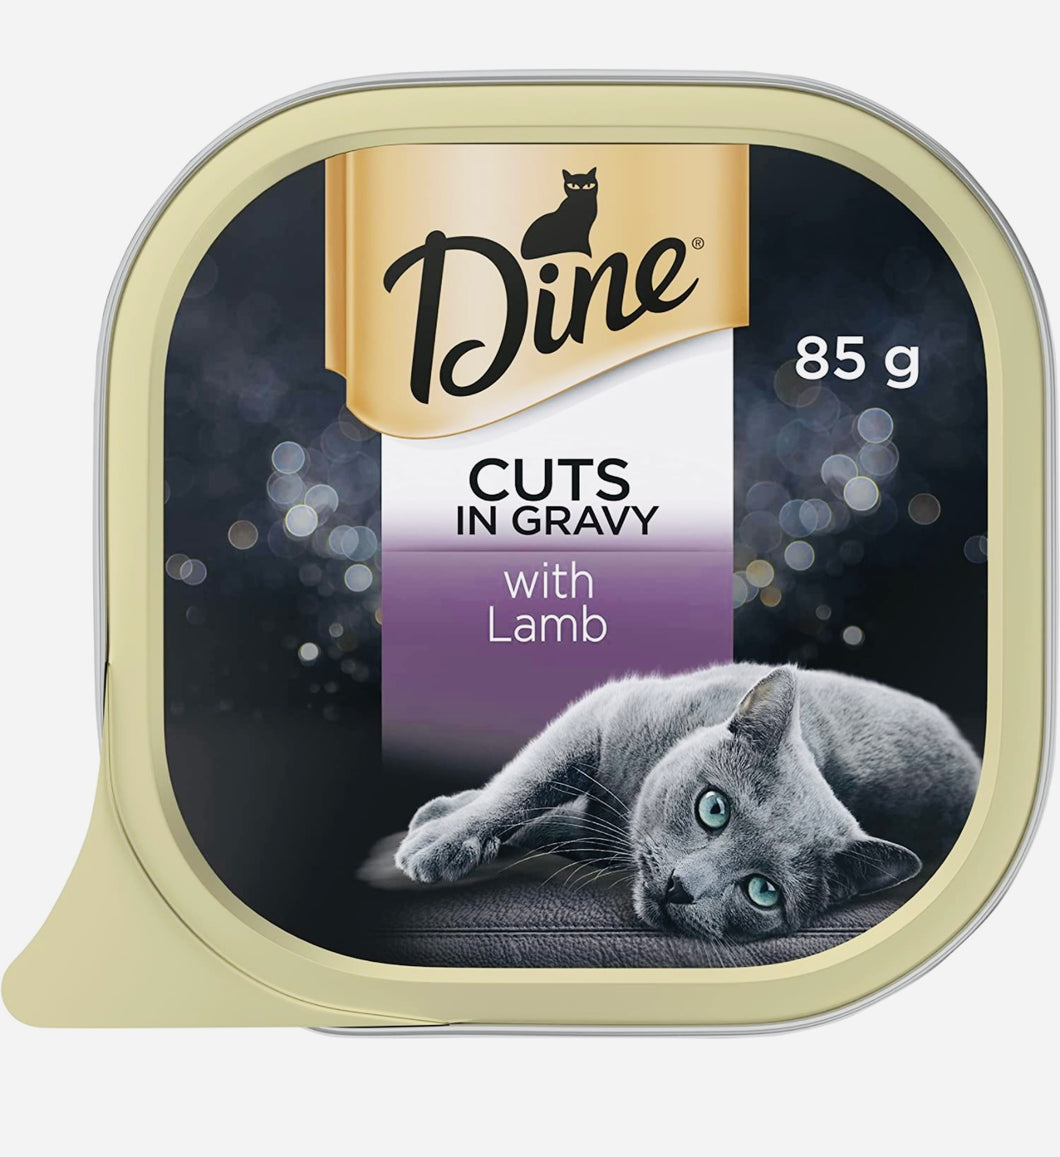 Dine cut in gravy with Lamb cat food adult 85gm*14 pack